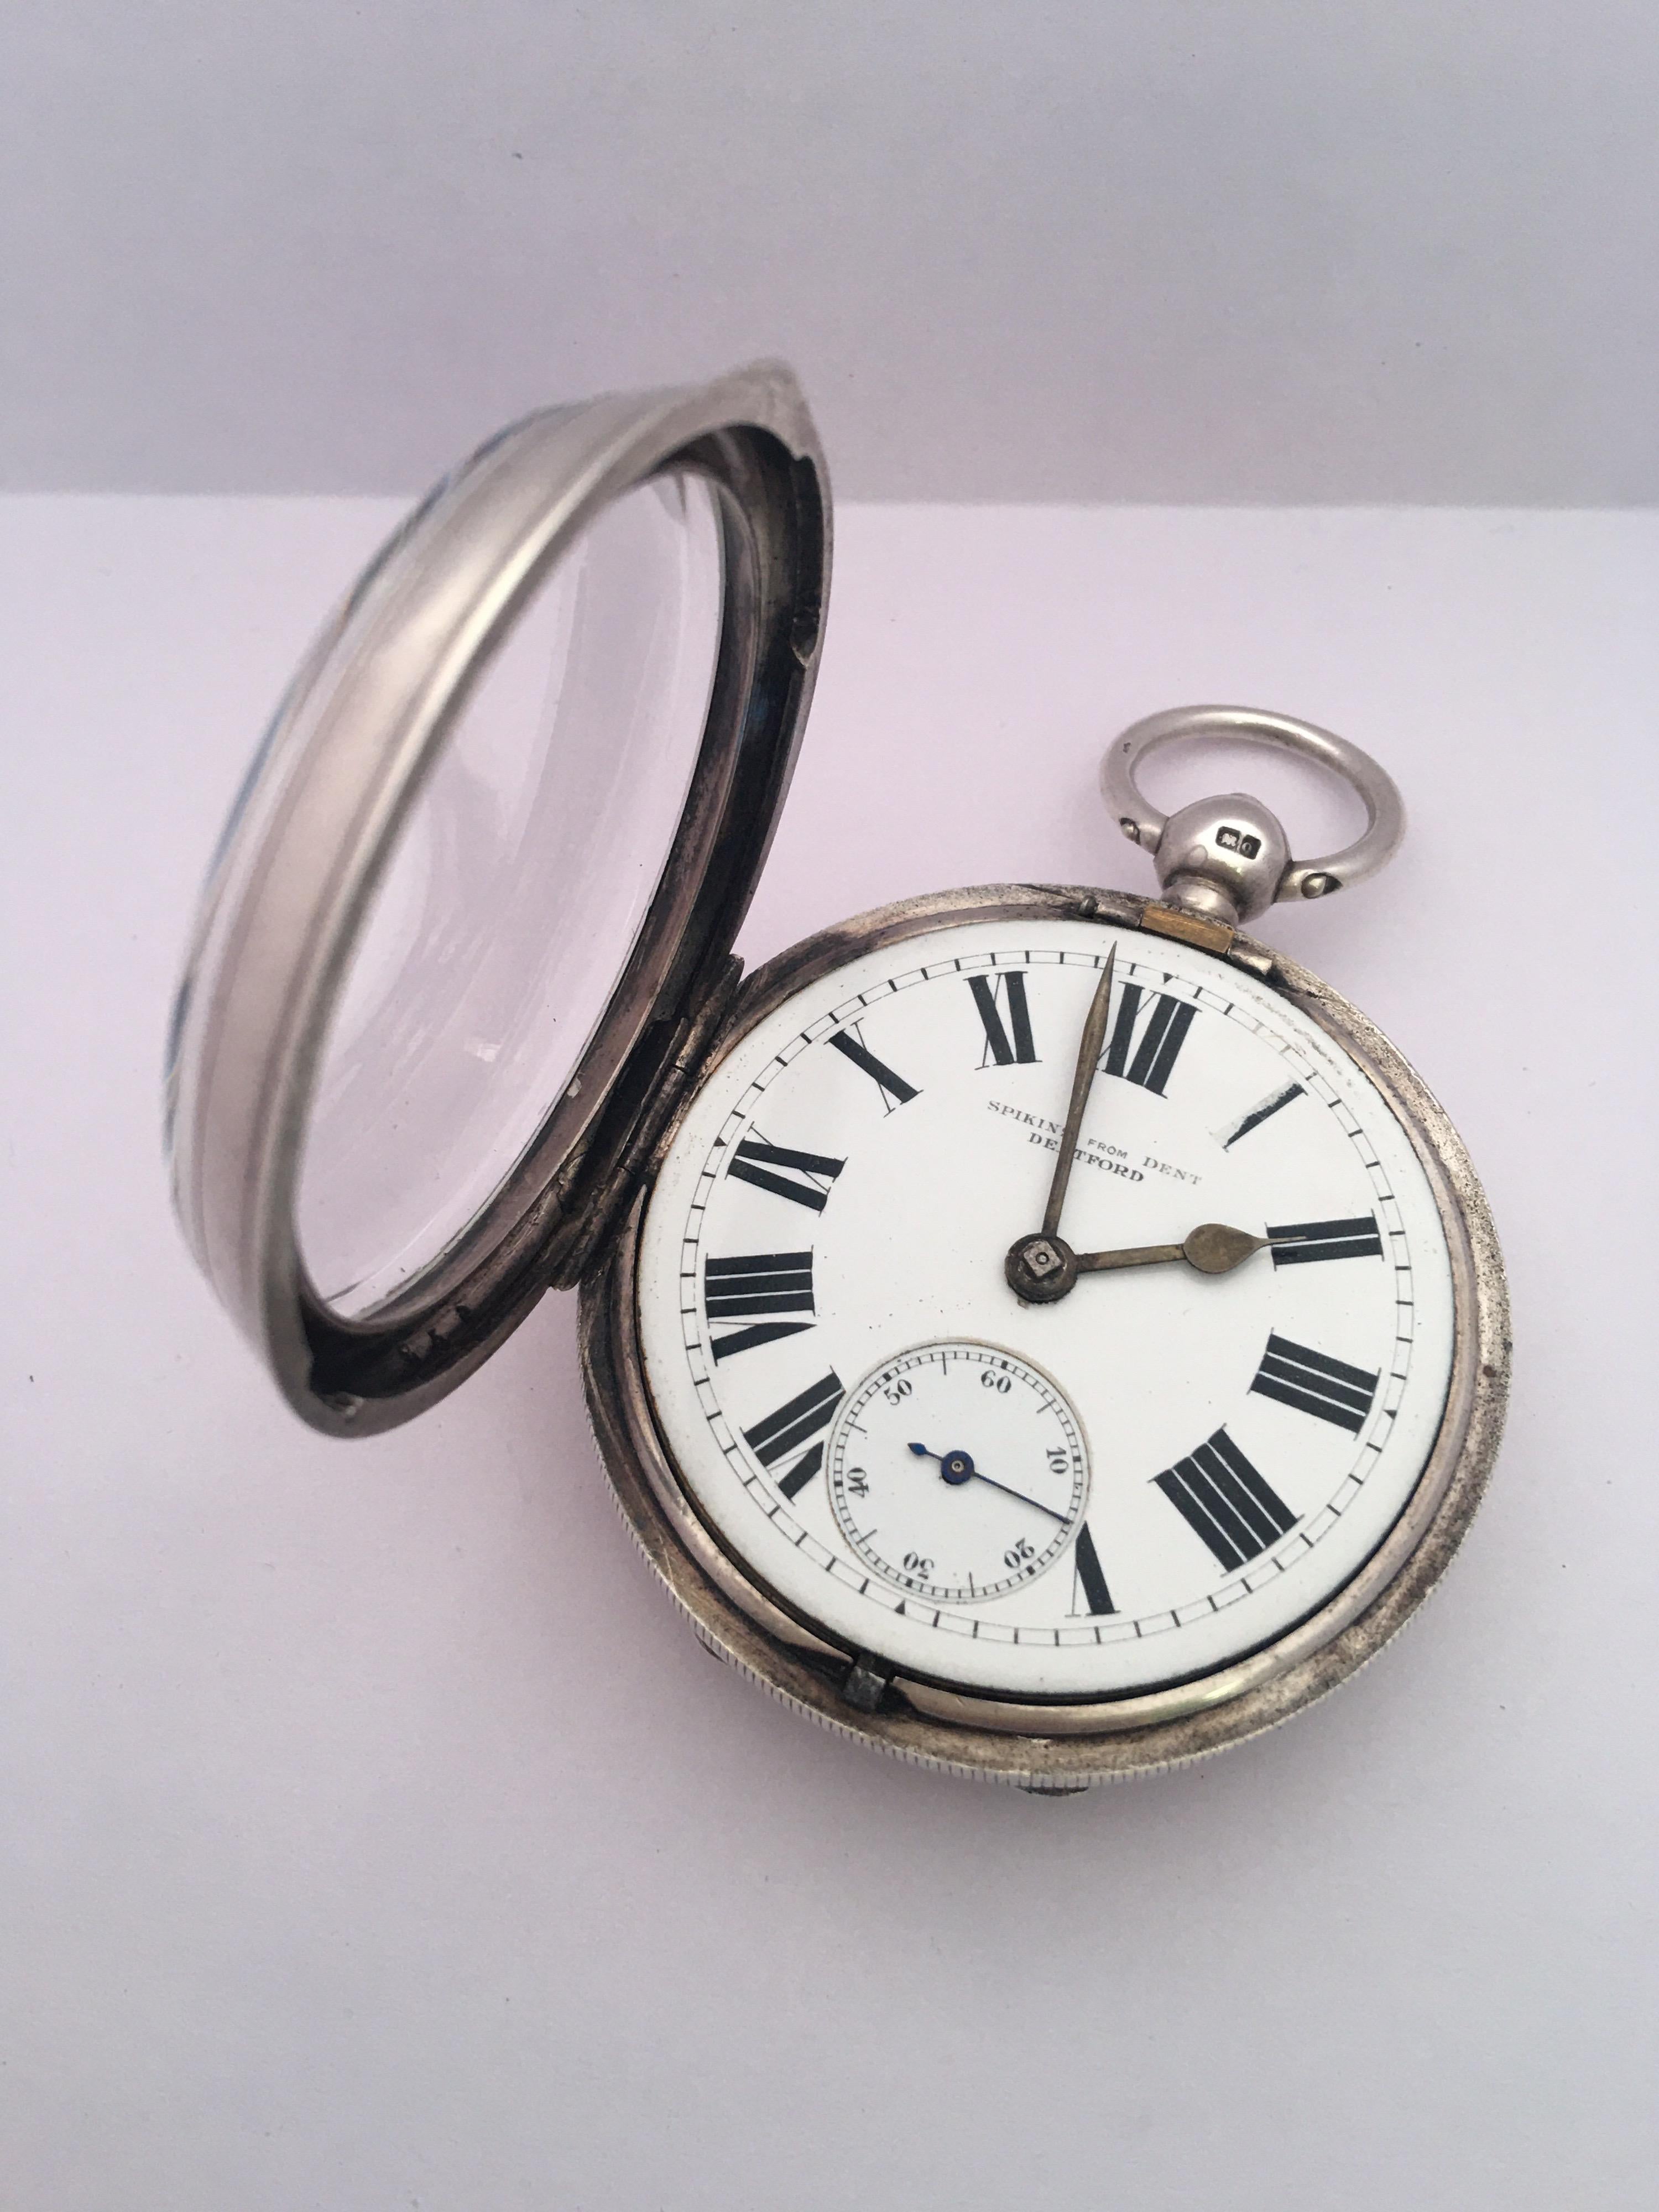 Antique Silver Key-Winding Pocket Watch Signed by Dent 6